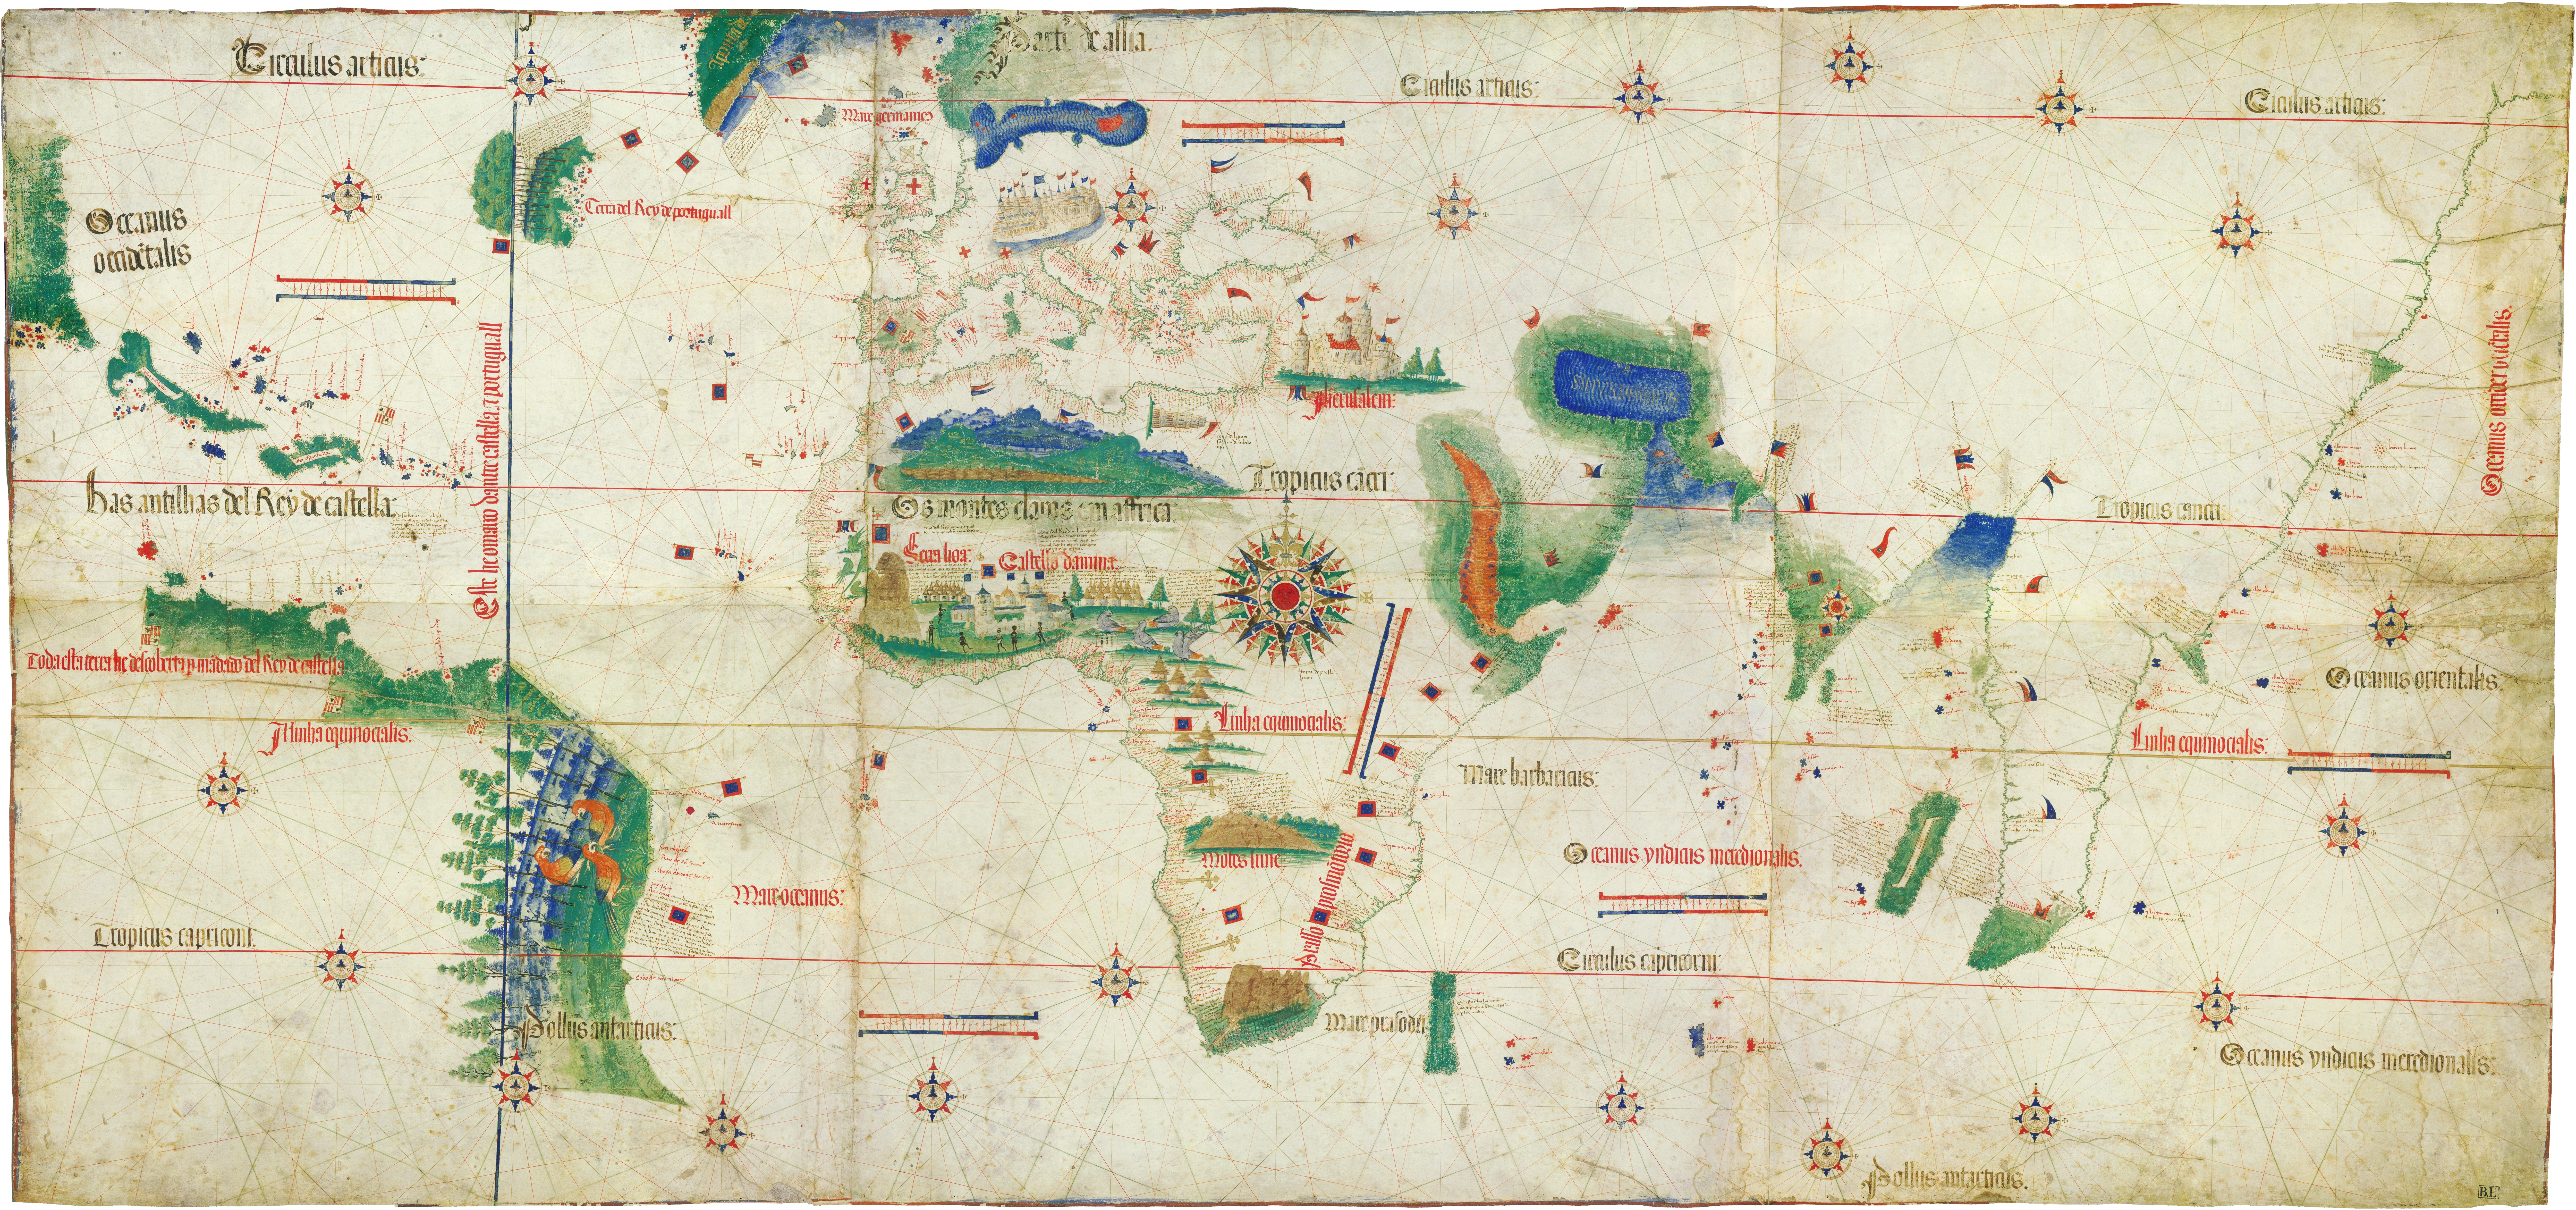 A Portuguese map depicts the world as it was known in 1502